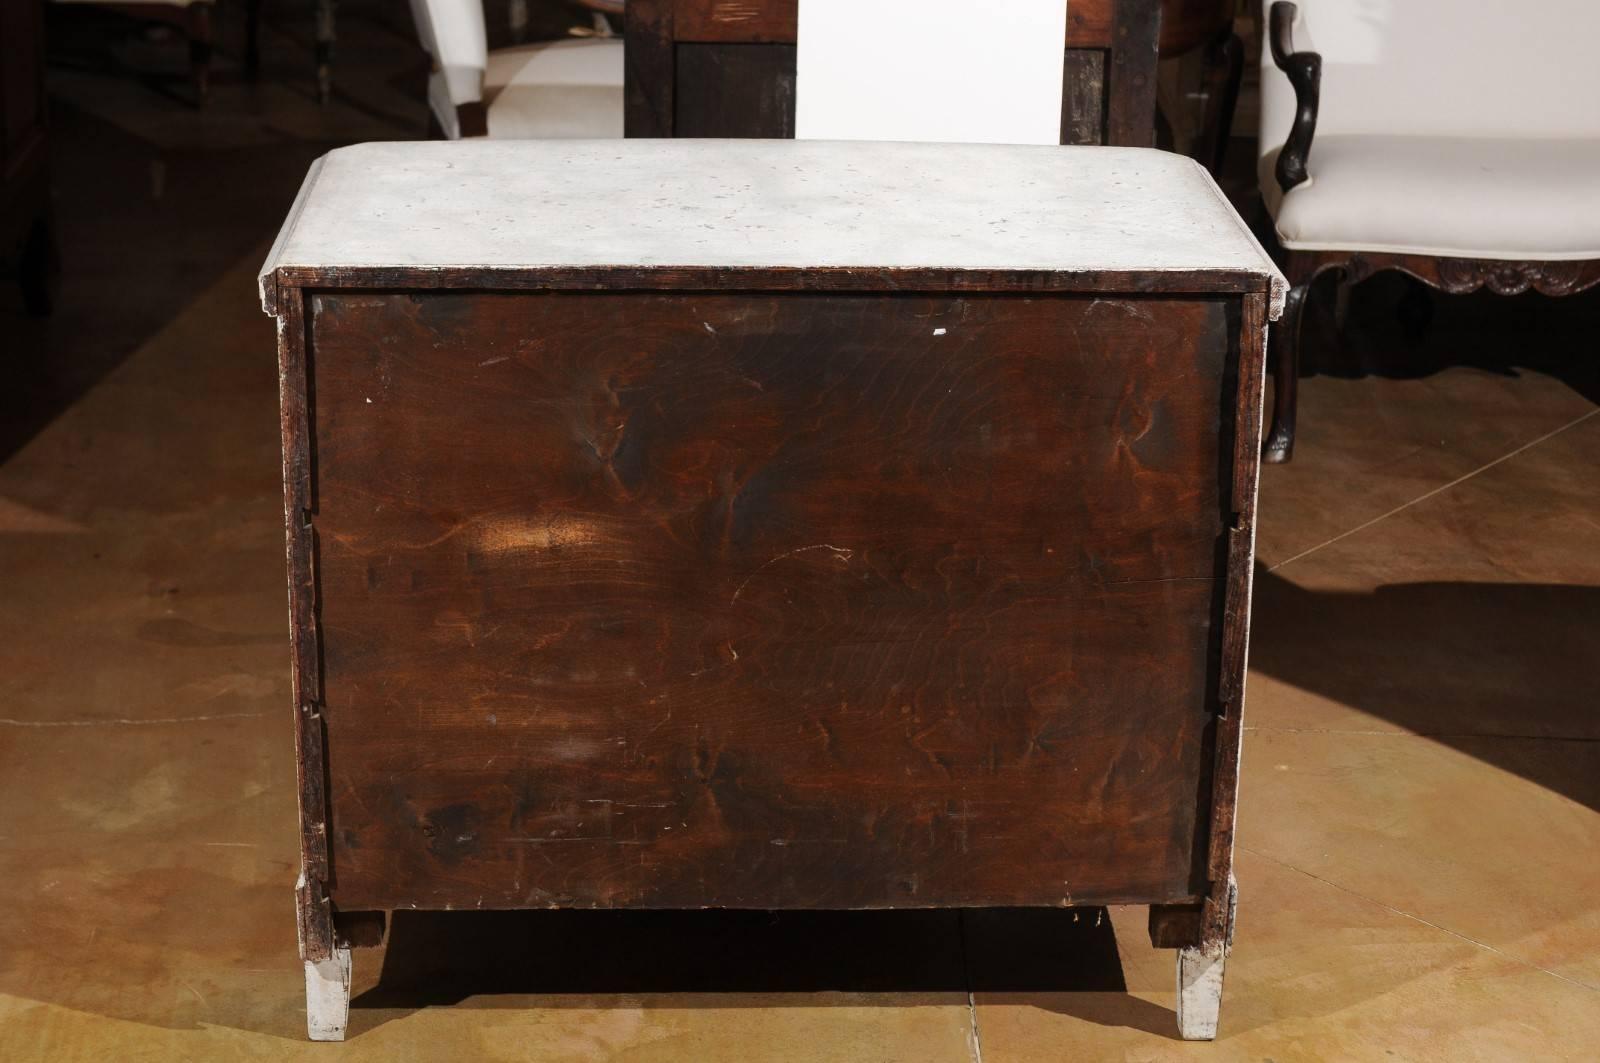 1810s Swedish Gustavian Period Painted Commode with Dentil Molding and Rosettes 1